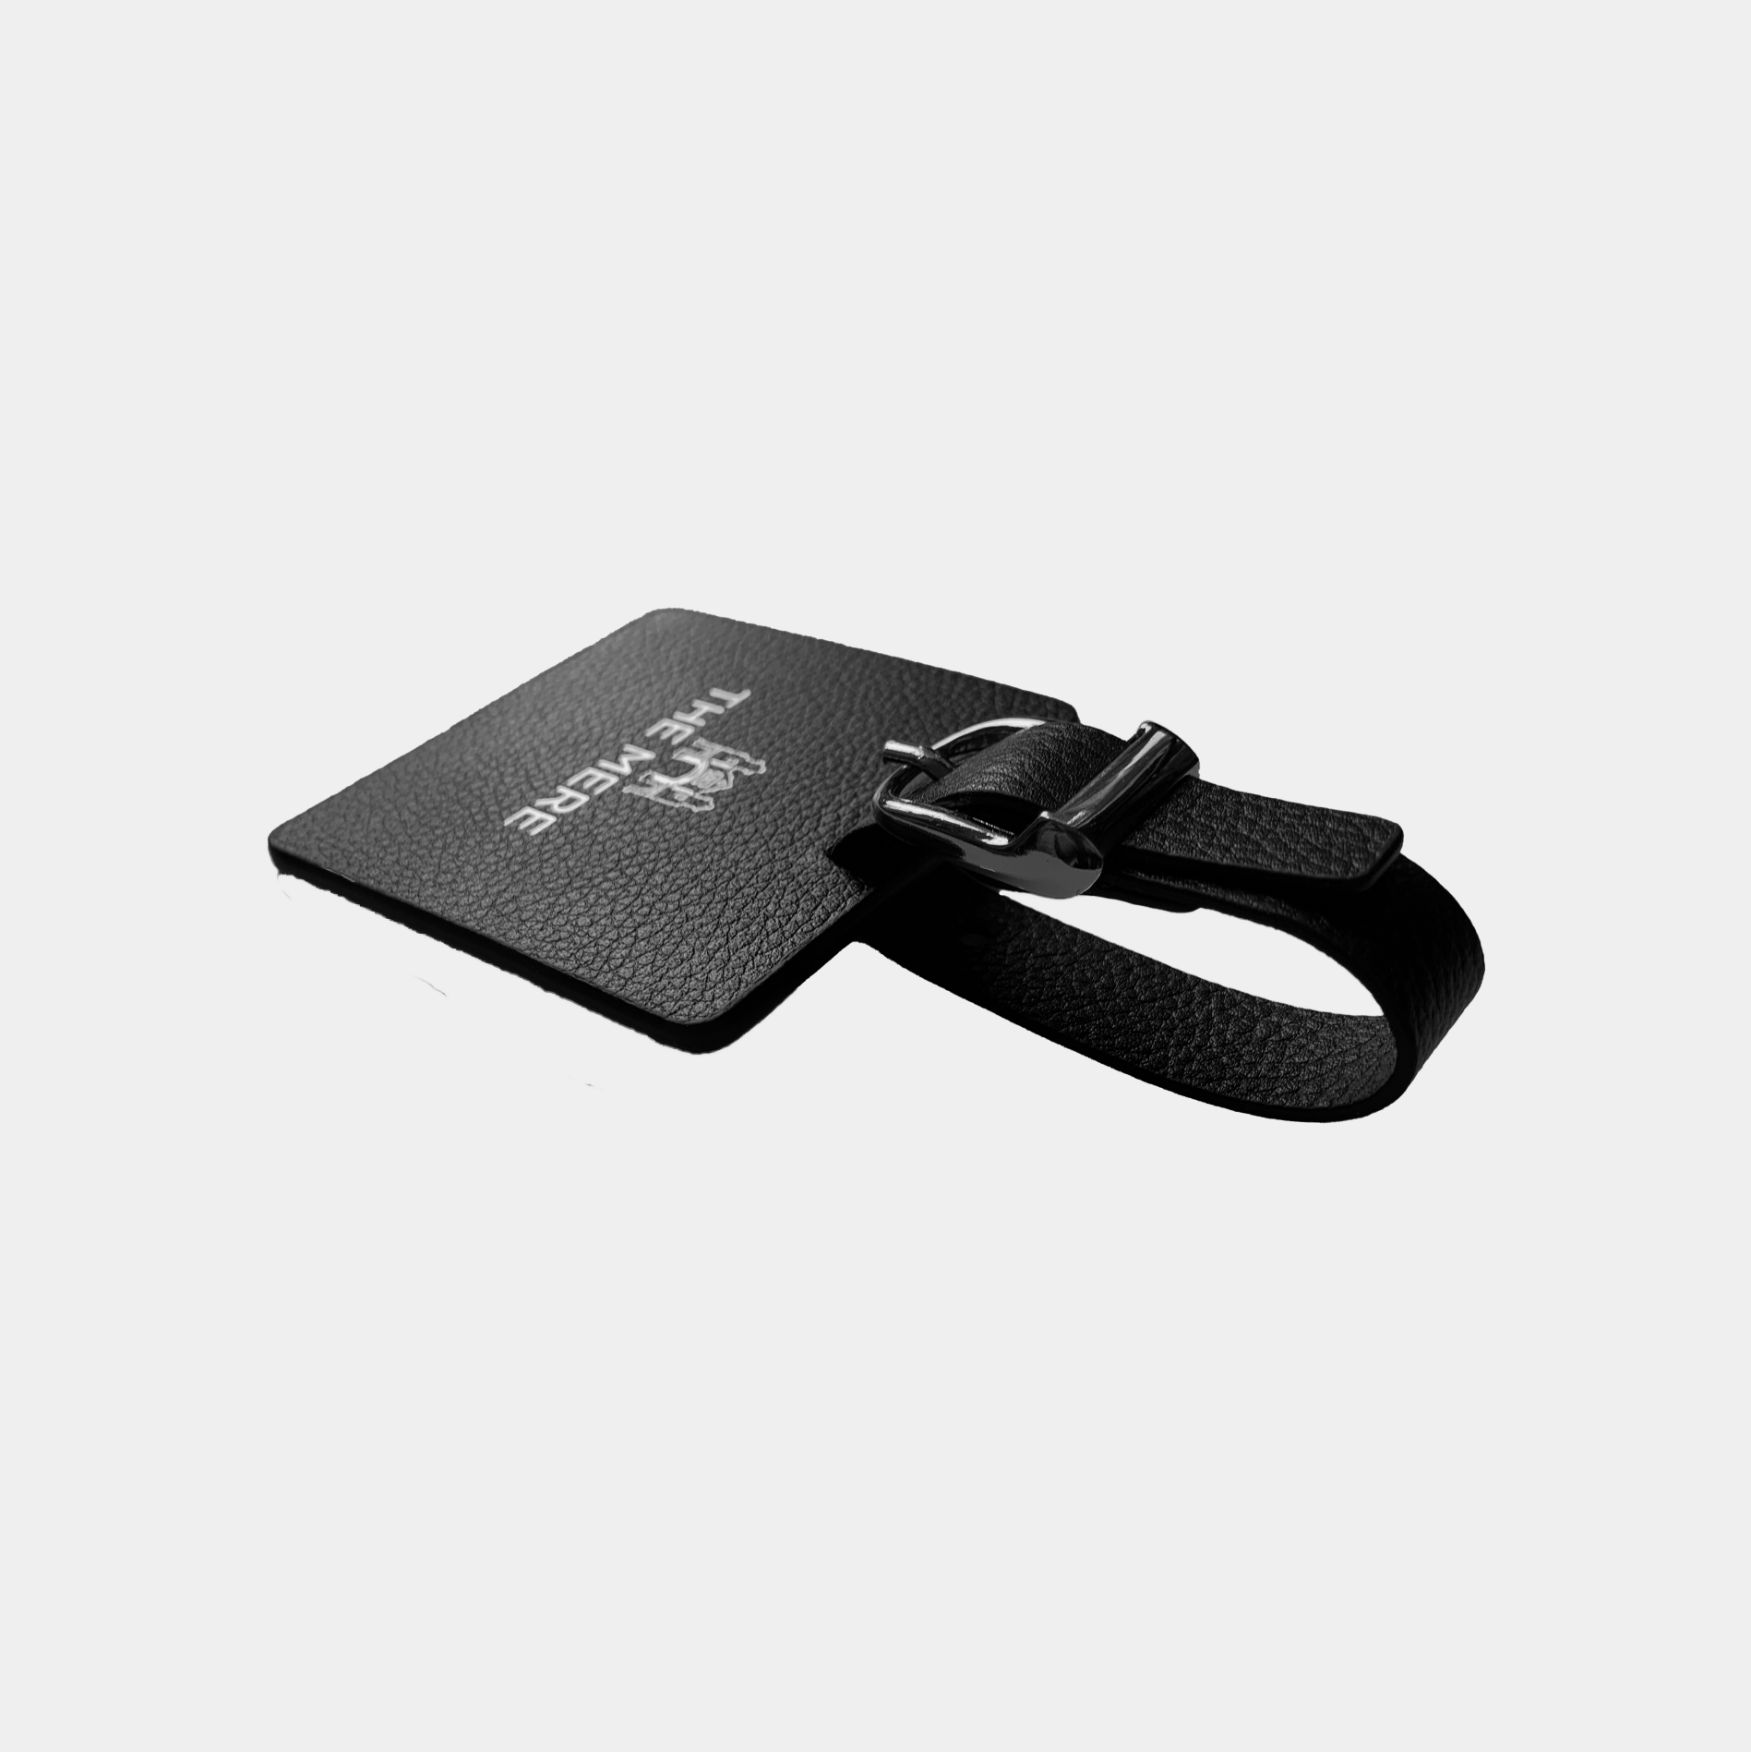 A leather bag tag designed for marketing on the move, gift a branded bag tag to your members and clients.